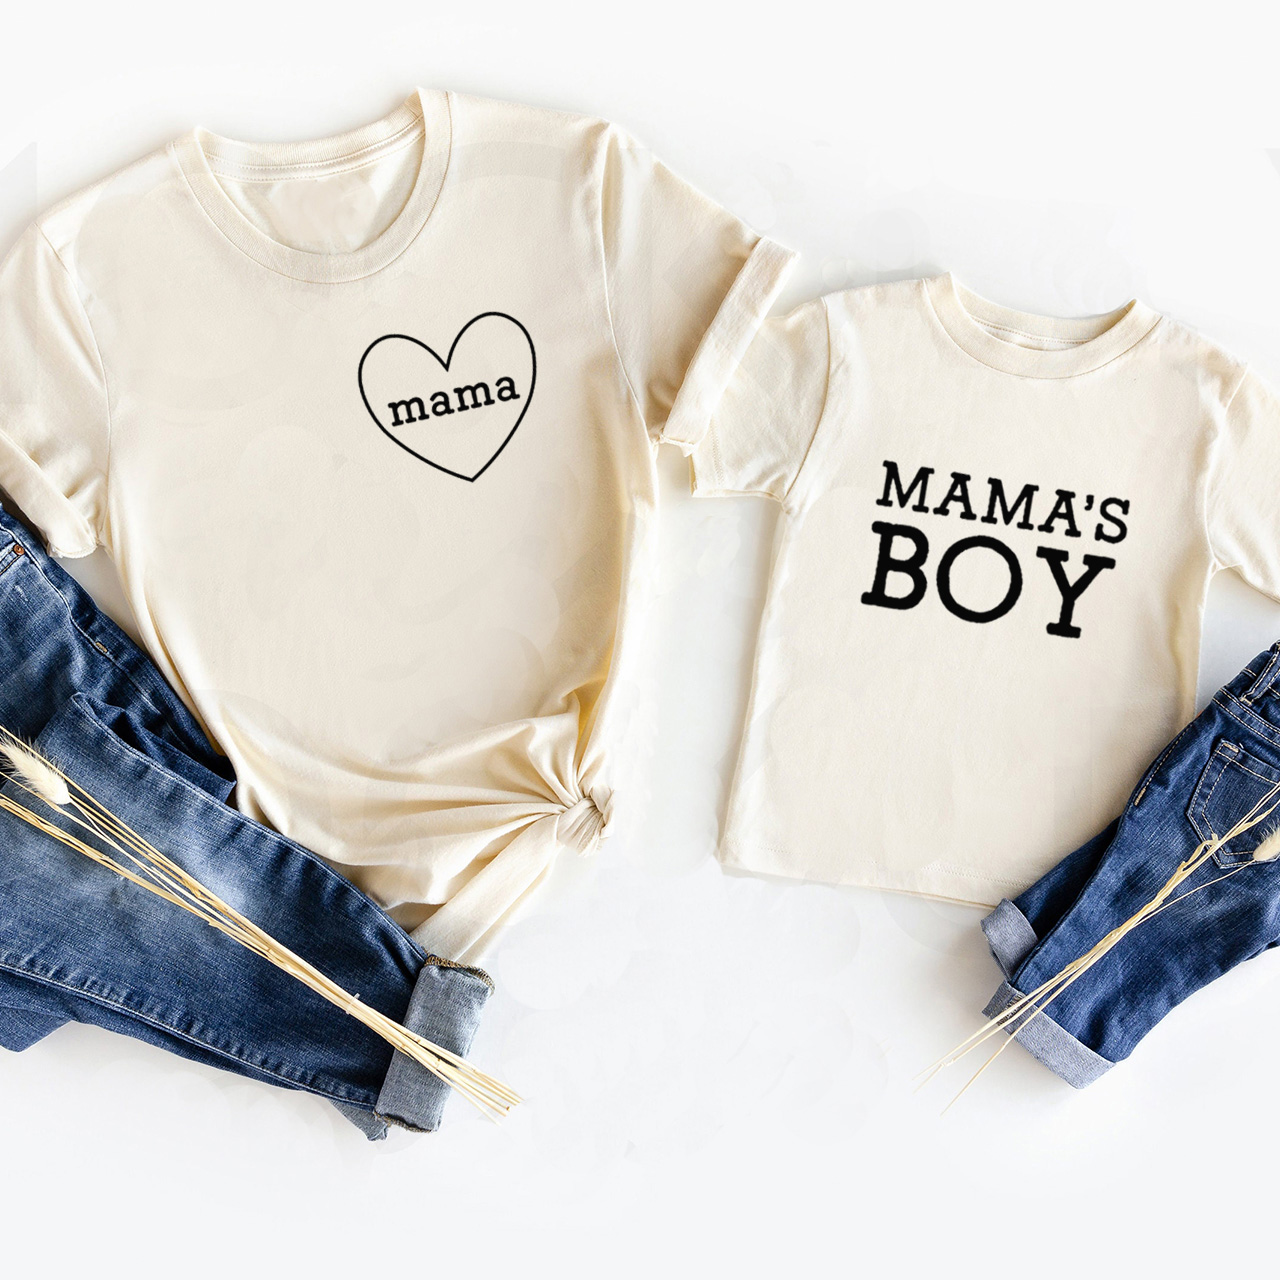 Mama & Mama's BOY GIRL Matching Tees For Mother's Day